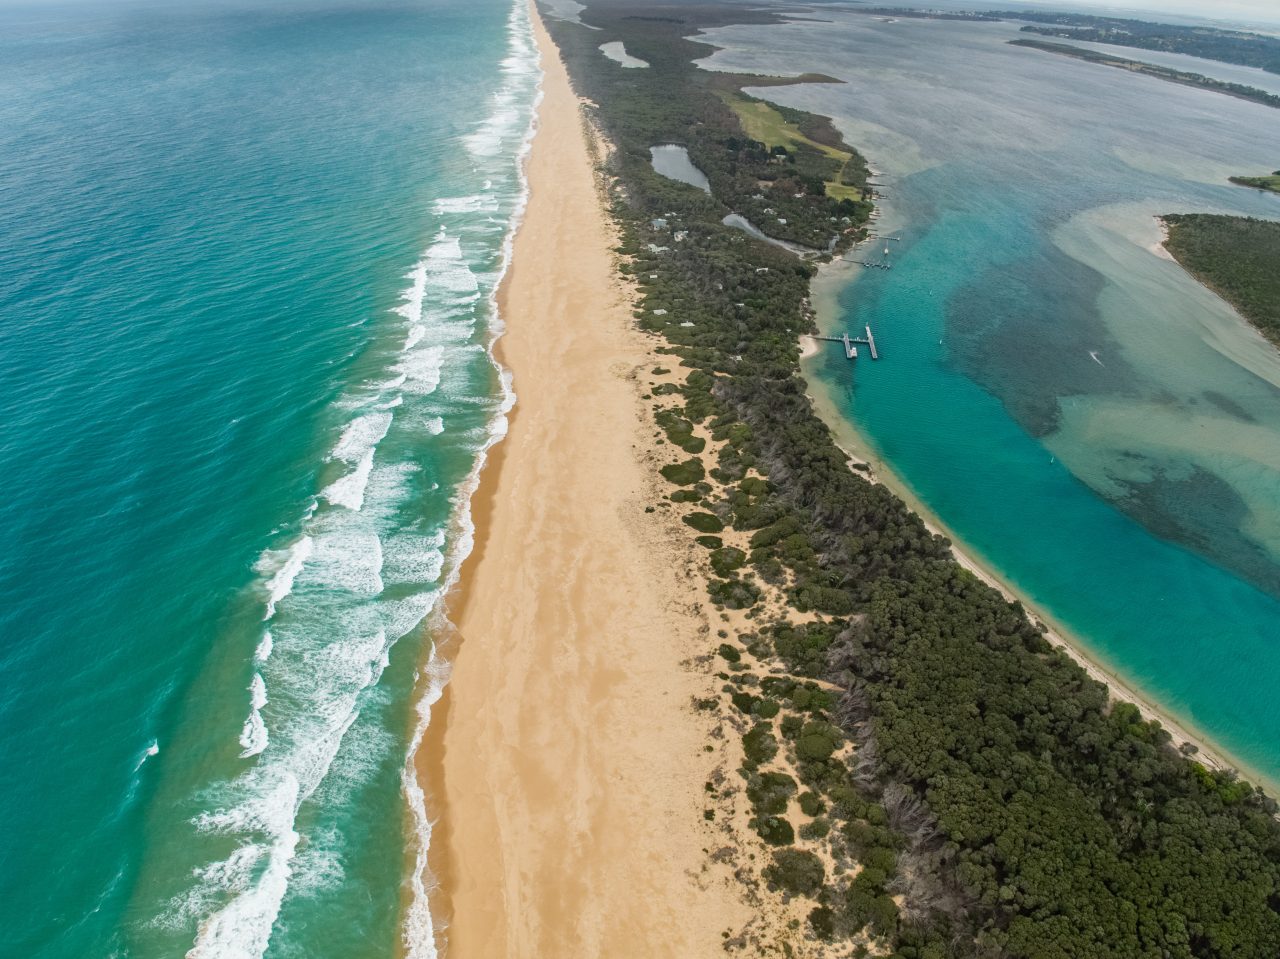 Birds eyes image of the Ninety Mile Beach. blue waters on either side of a a sand dune and forest